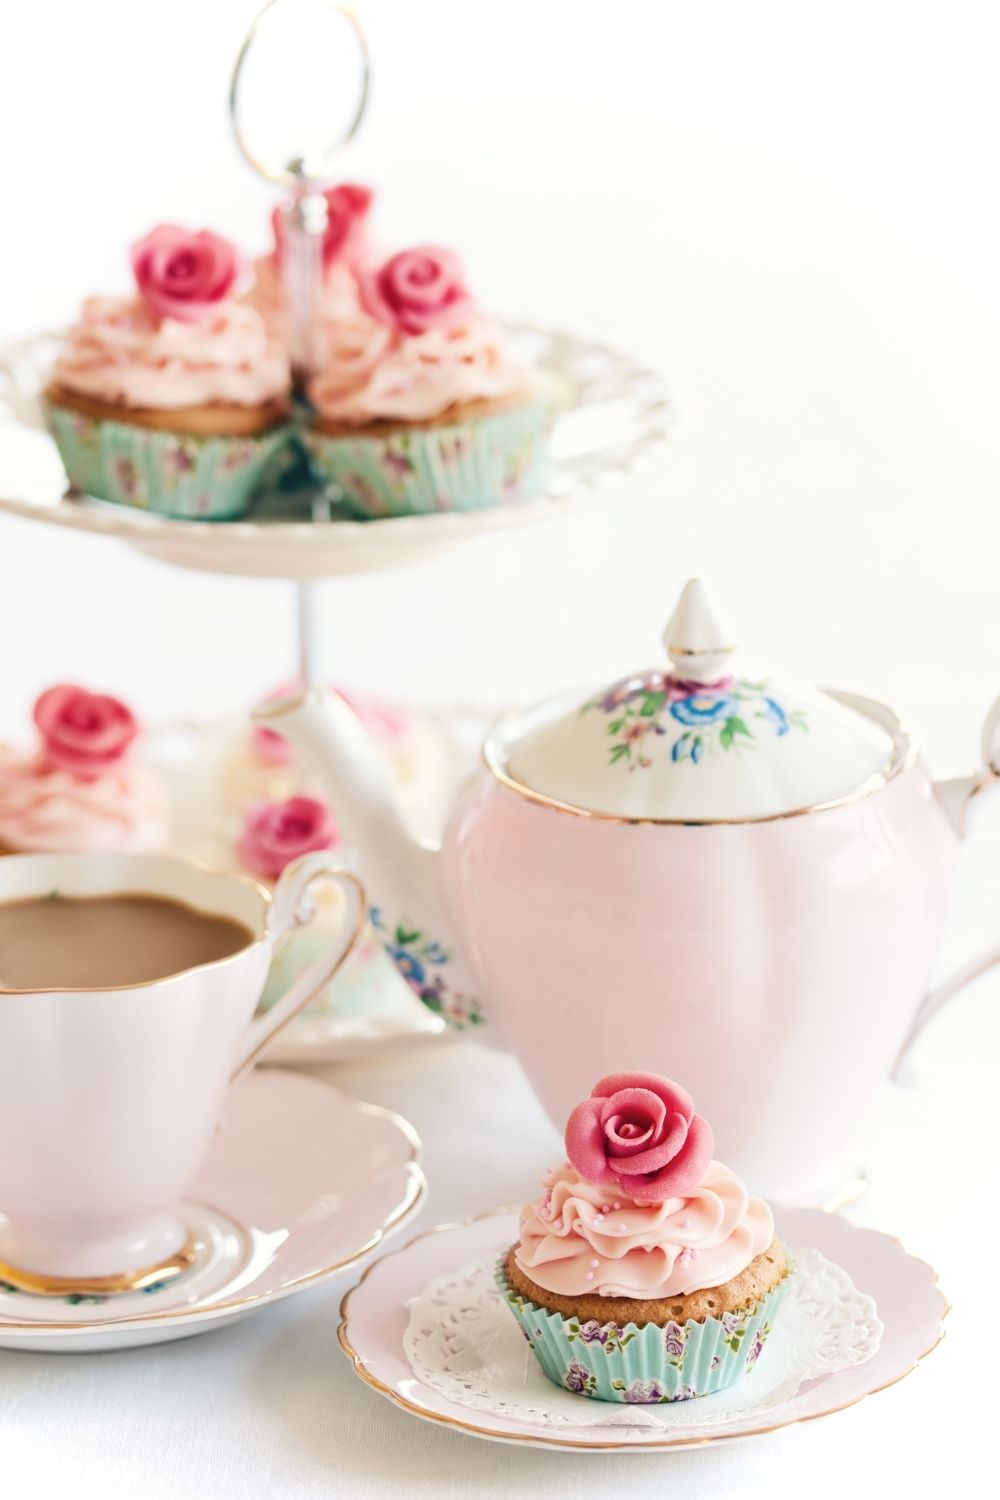 How to plan your own quintessential English afternoon tea party